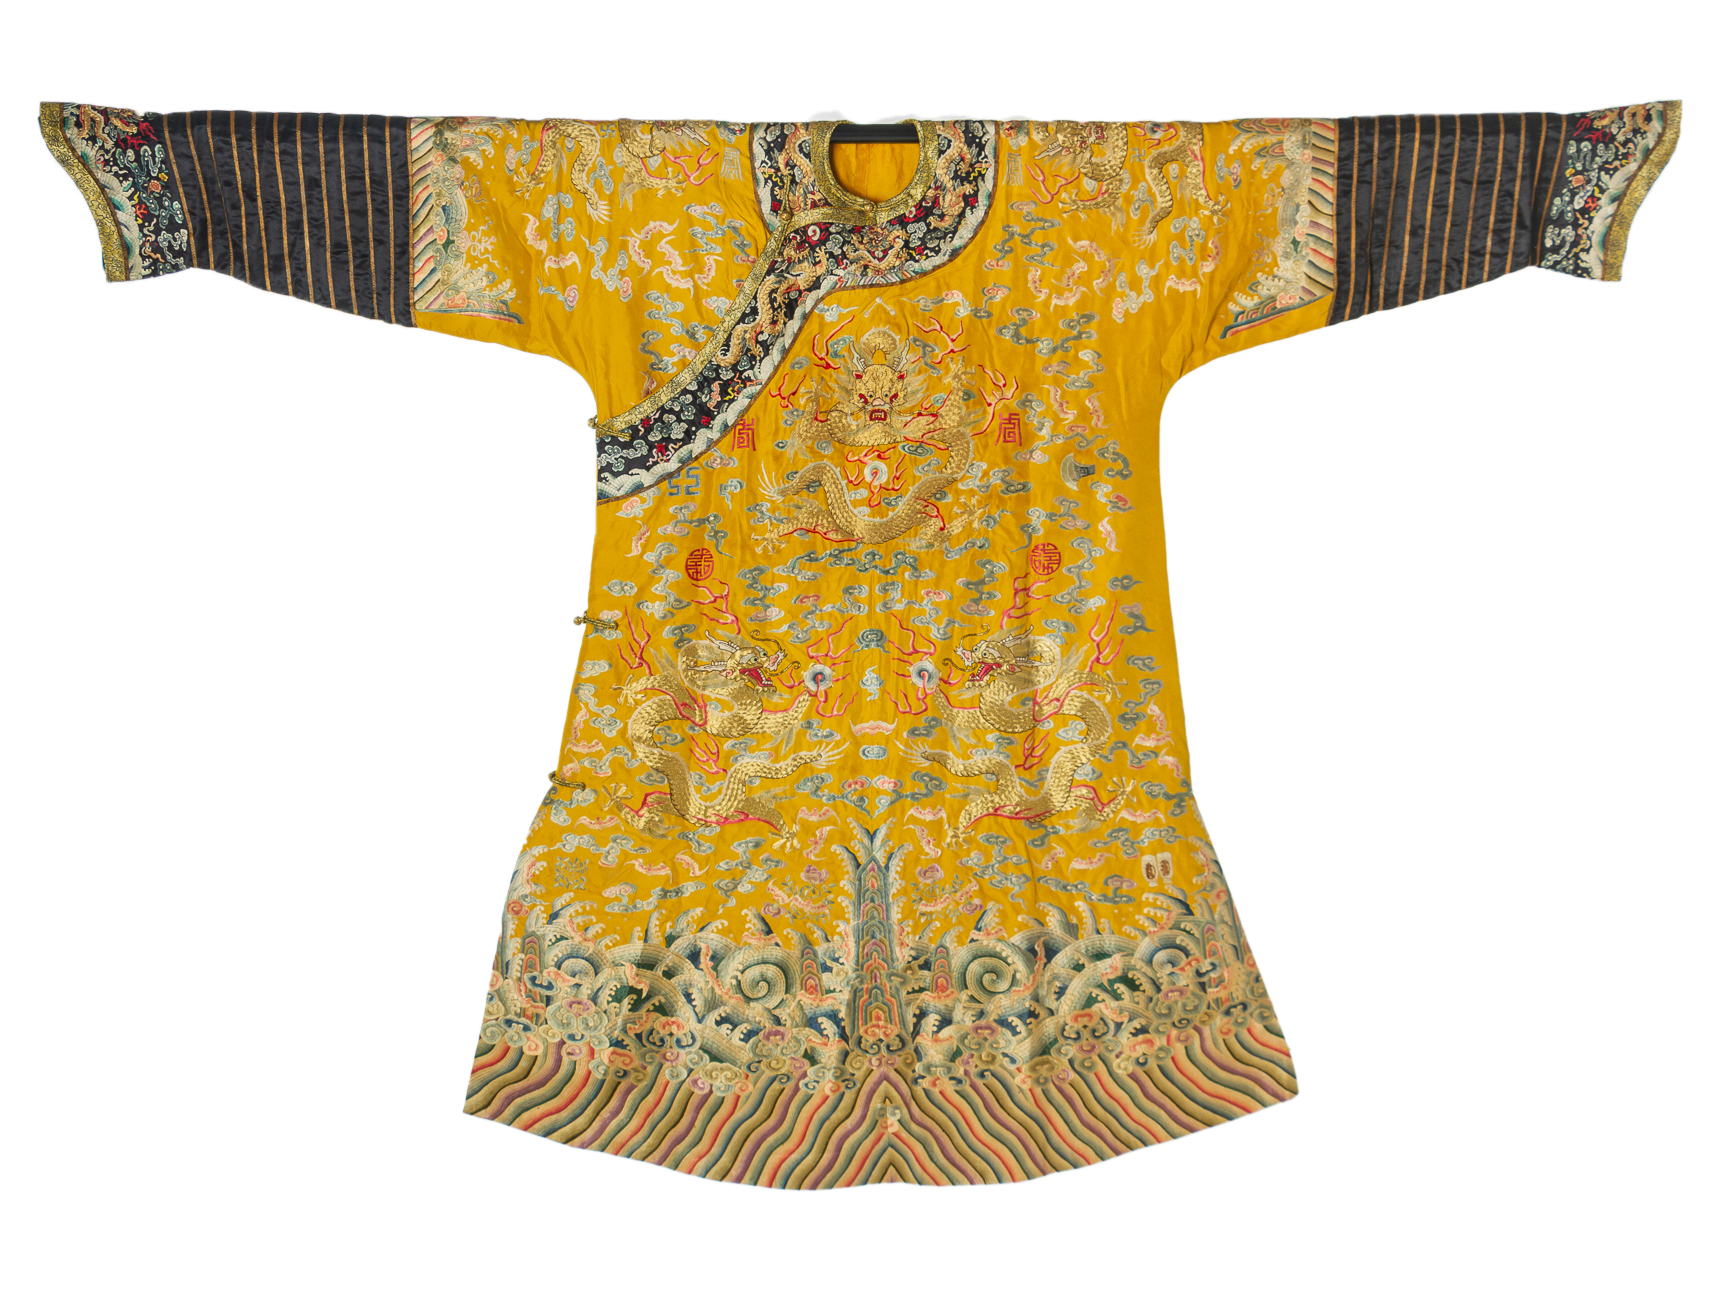 A CHINESE YELLOW EMBROIDERED SILK 'DRAGON' ROBE